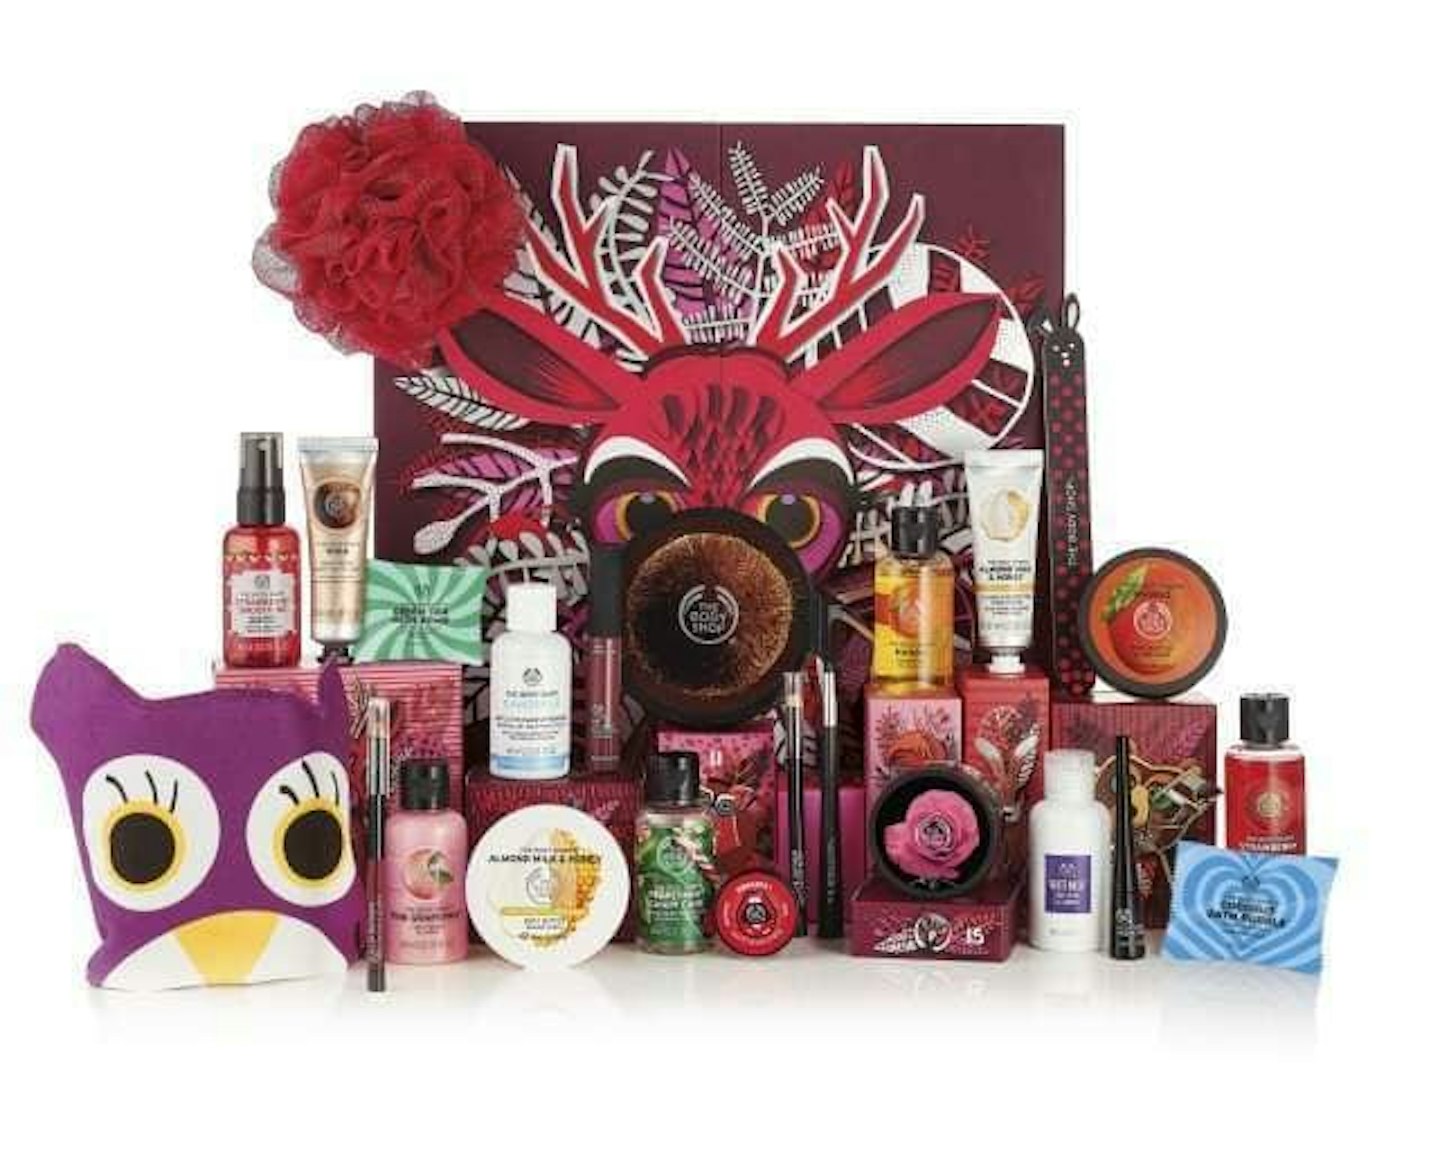 25 Days of the Enchanted Deluxe Advent Calendar